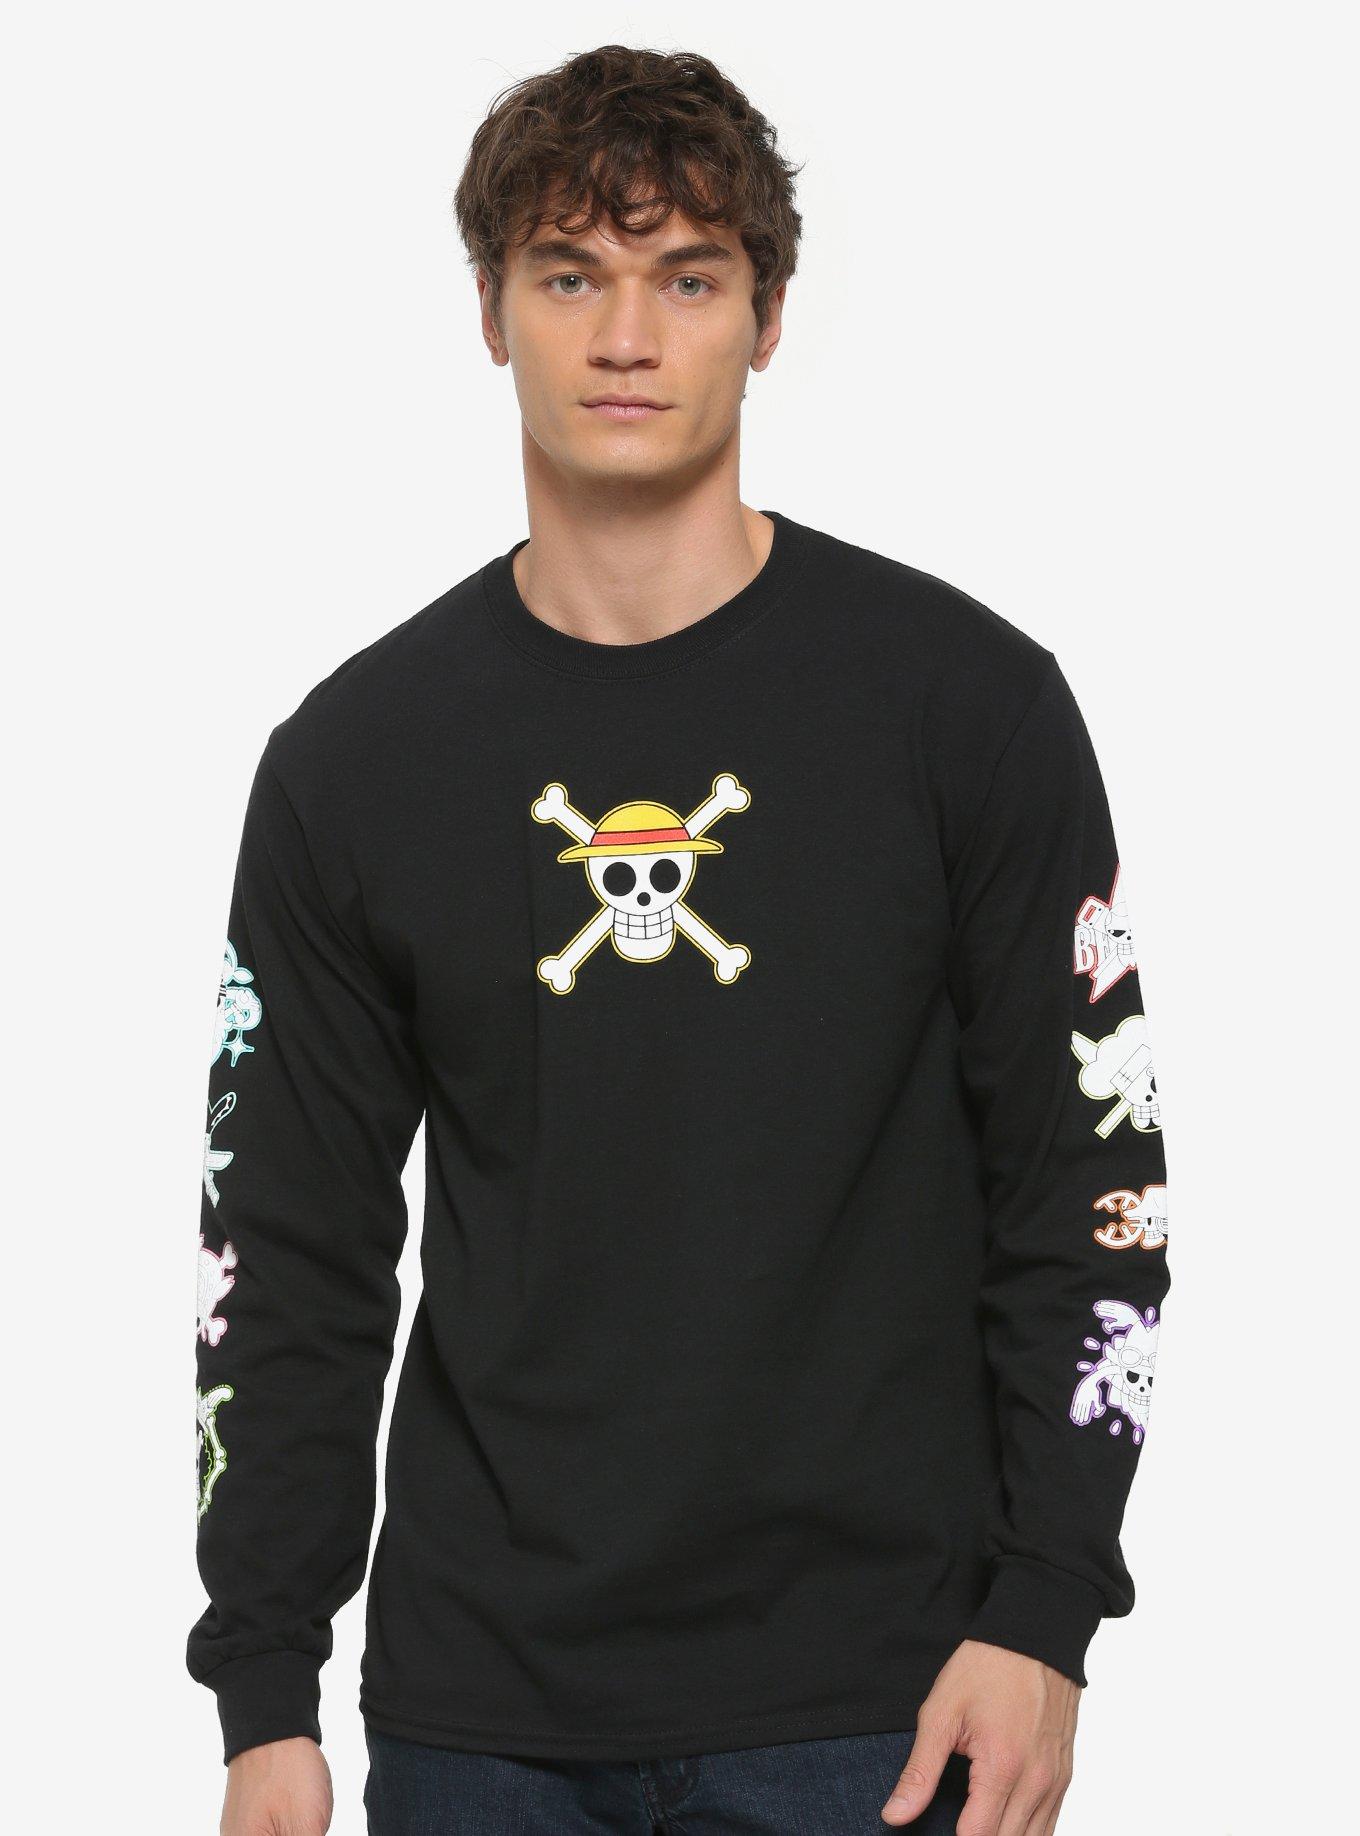 One Piece Straw Hats Live Action Jolly Roger T-Shirt